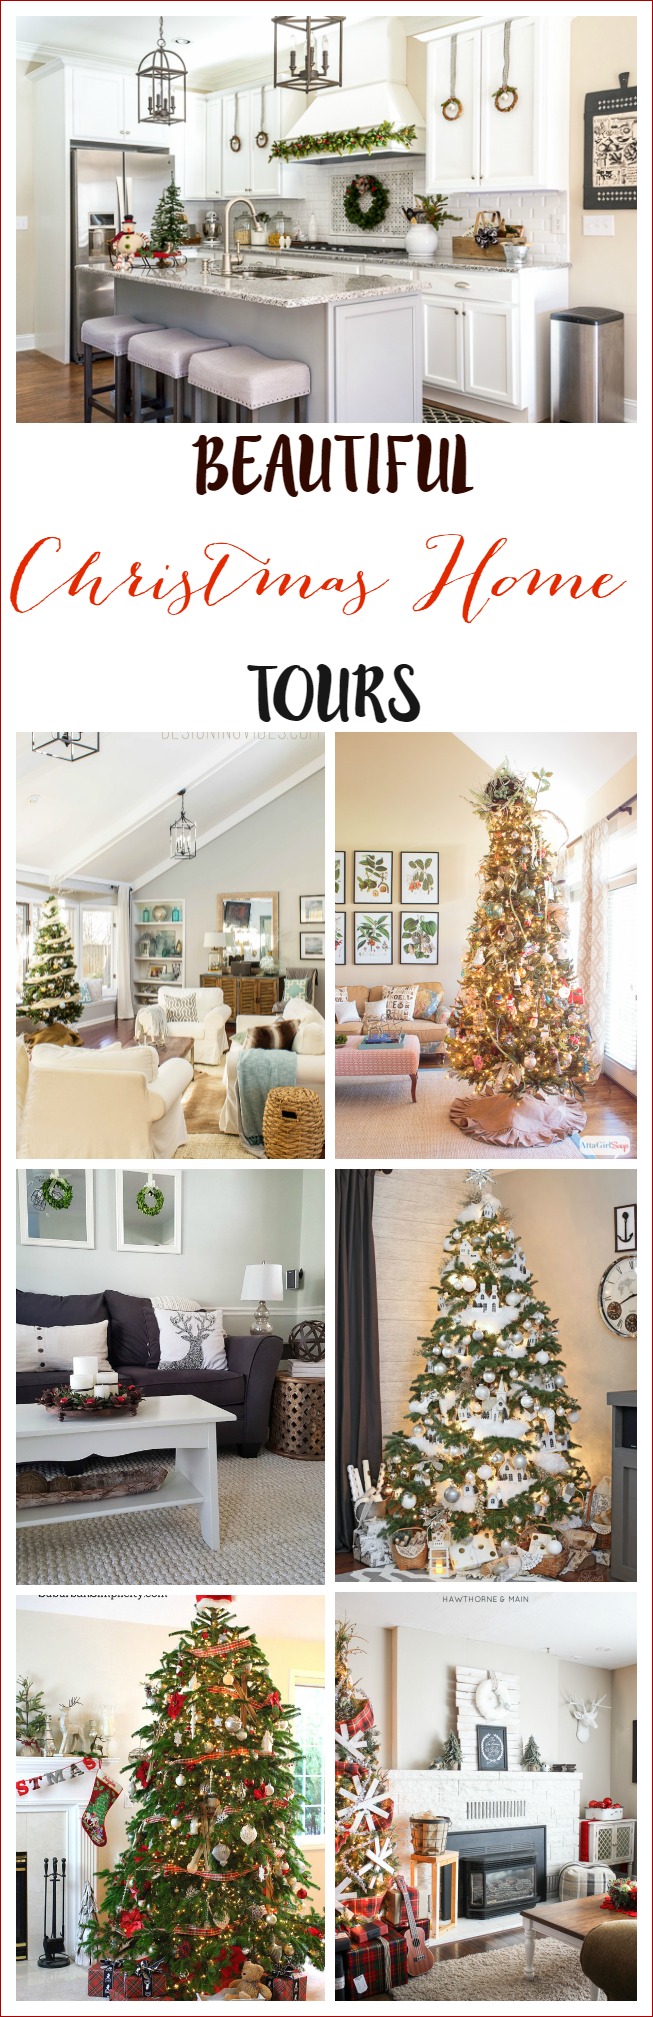 Beautiful Christmas Home Tours poster.